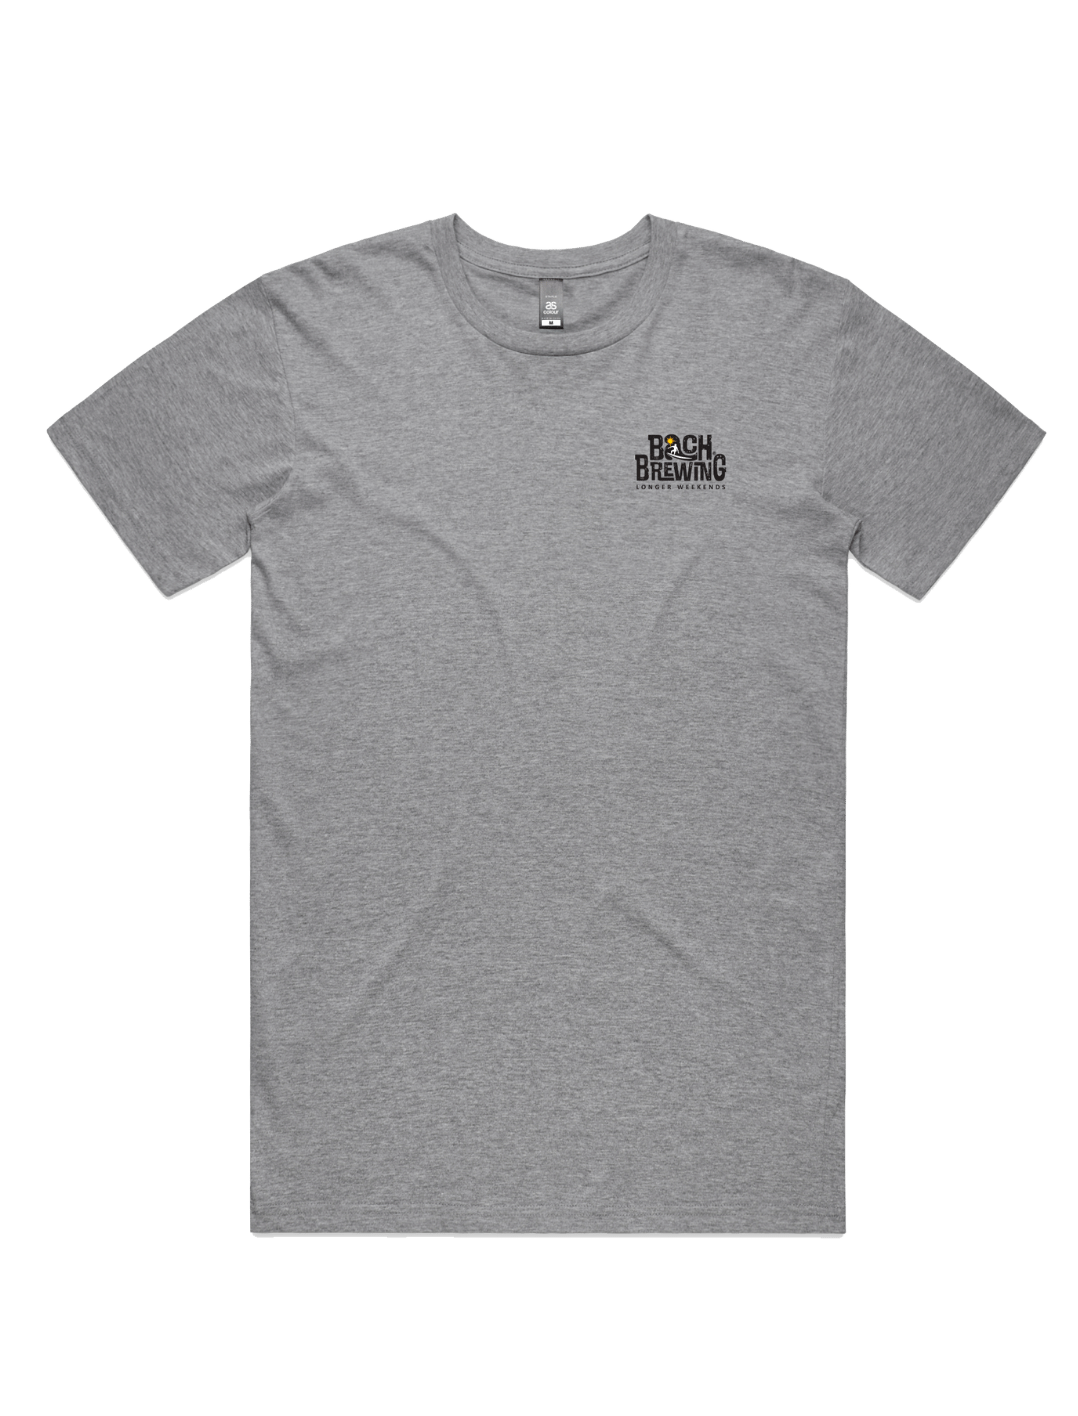 Bach Brewing Mens T-shirt - Supajuice (front graphic)